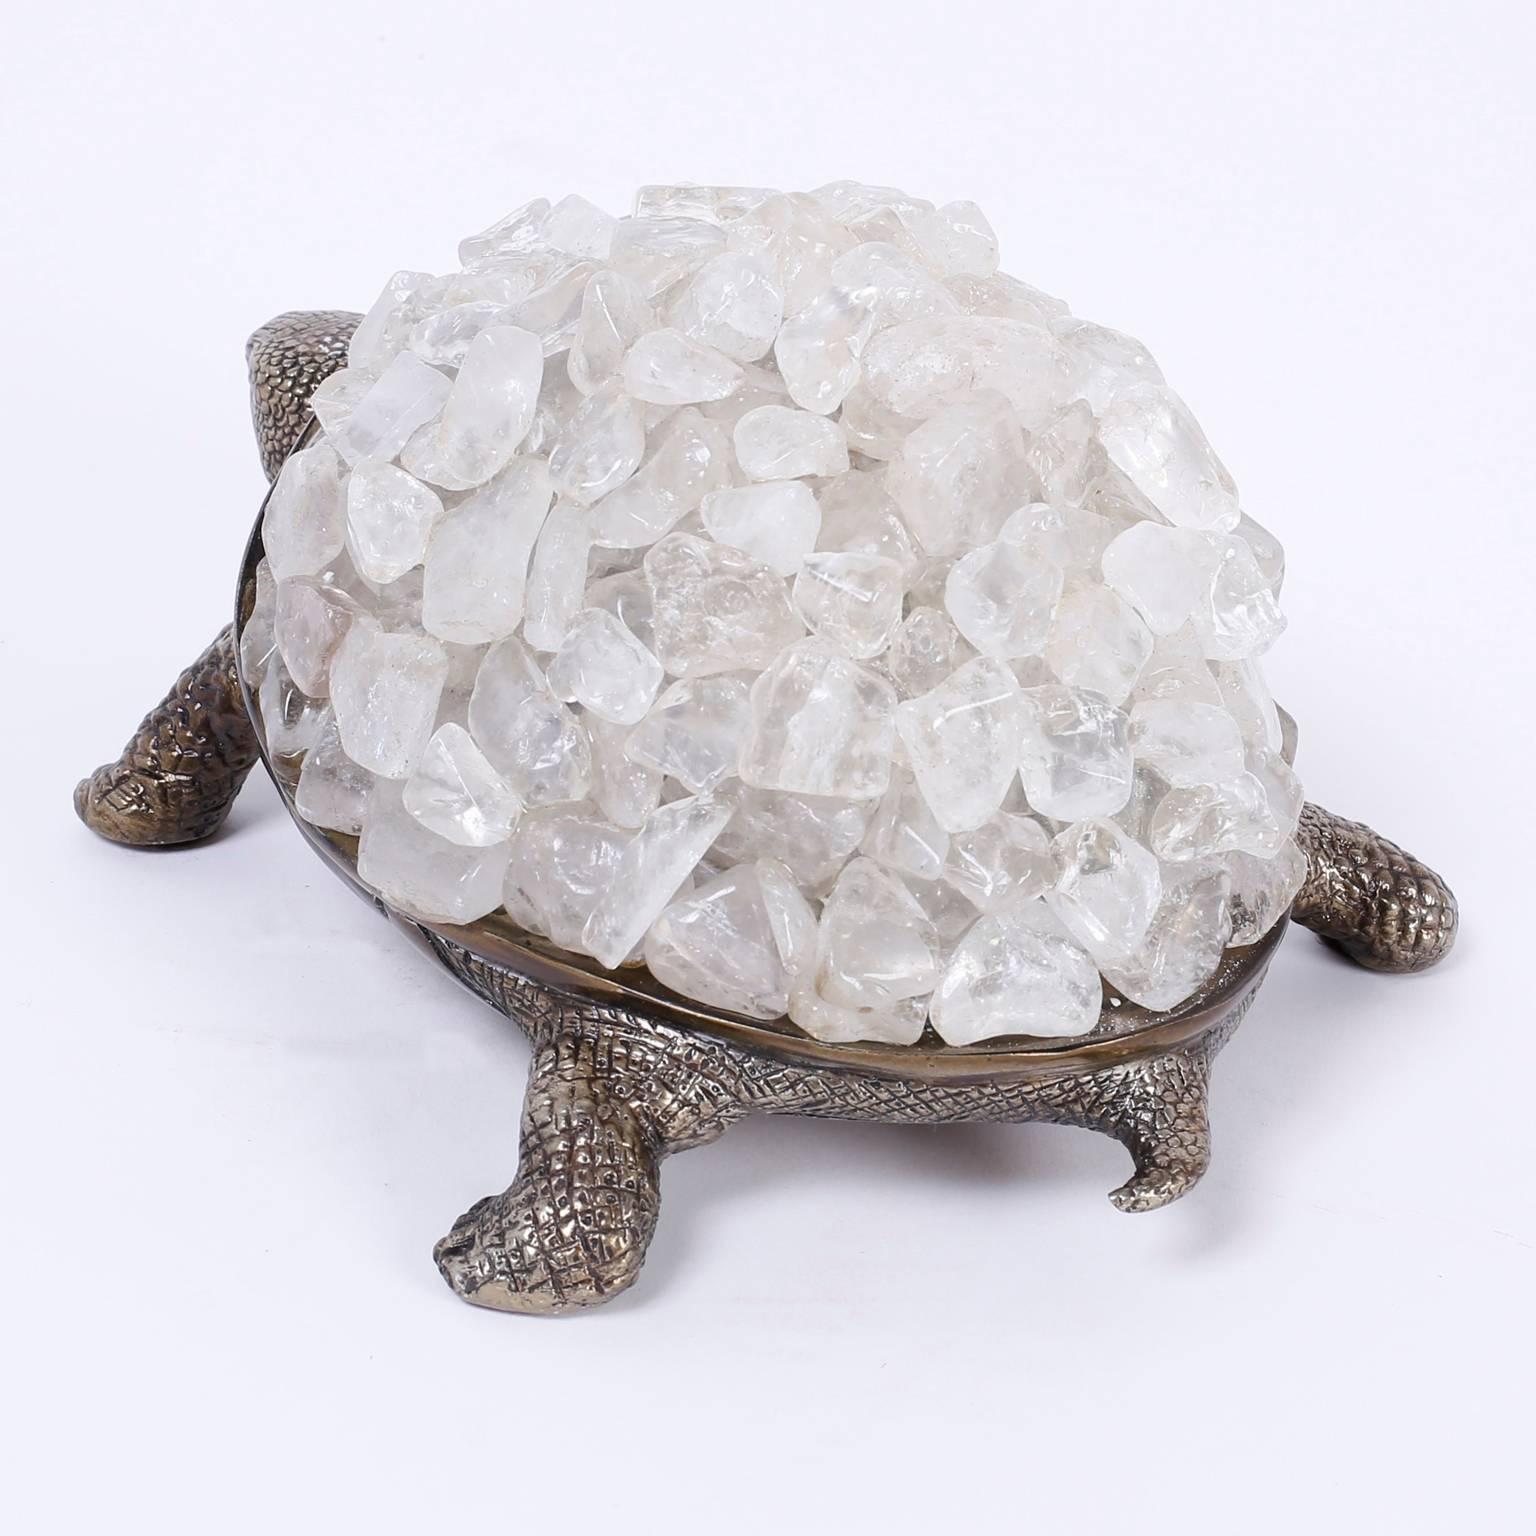 American Silver Plate over Brass Turtle Sculpture with a Quartz Crystal Stone Shell